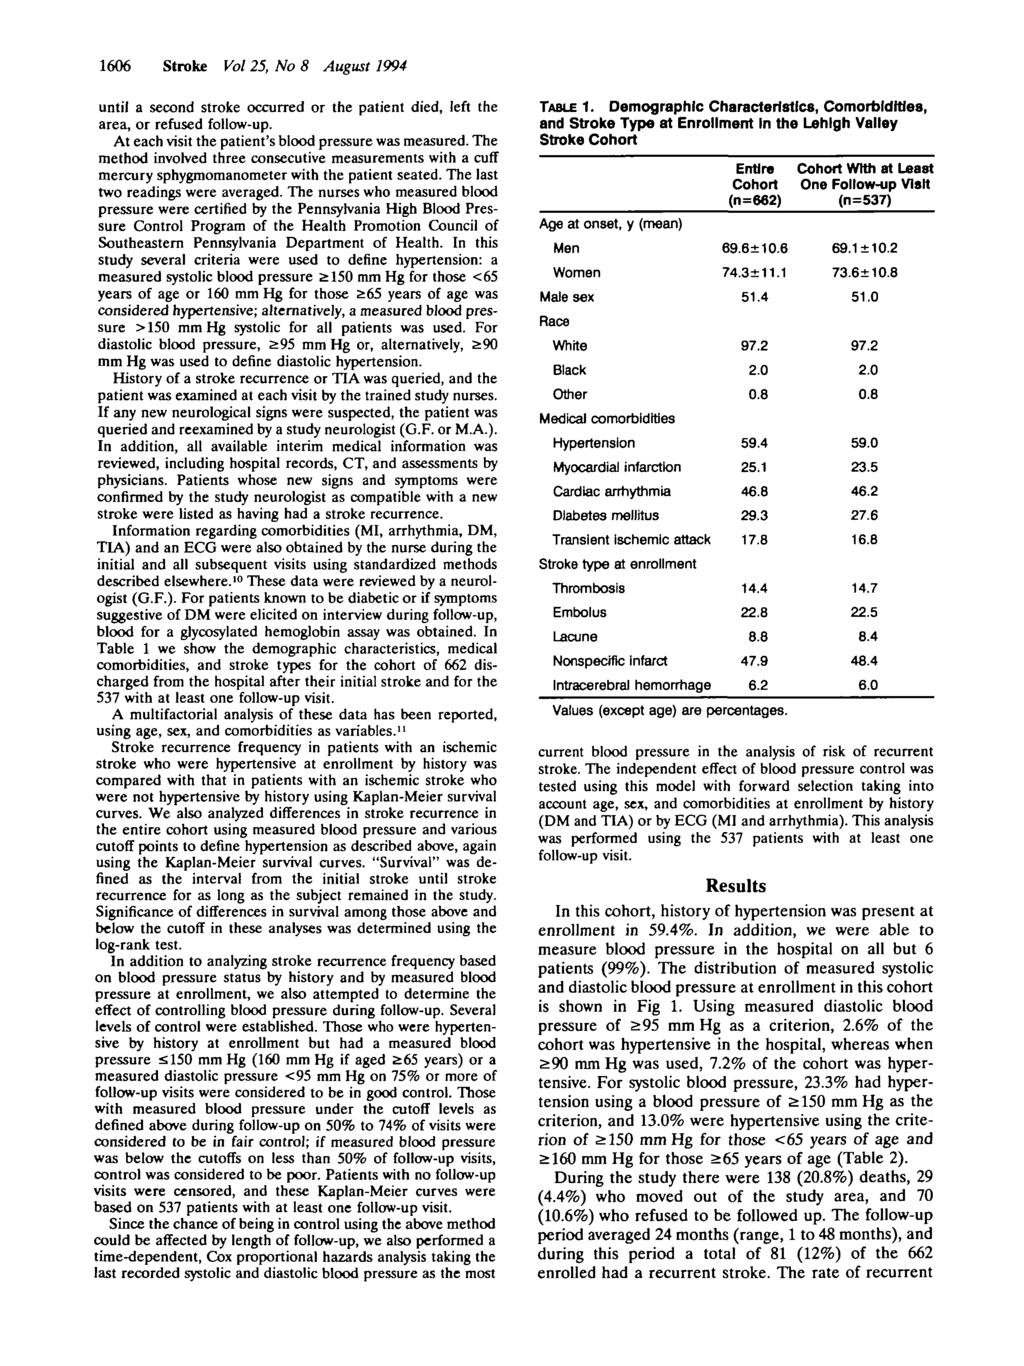 1606 Stroke Vol 25, No 8 August 1994 until a second stroke occurred or the patient died, left the area, or refused follow-up. At each visit the patient's blood pressure was measured.